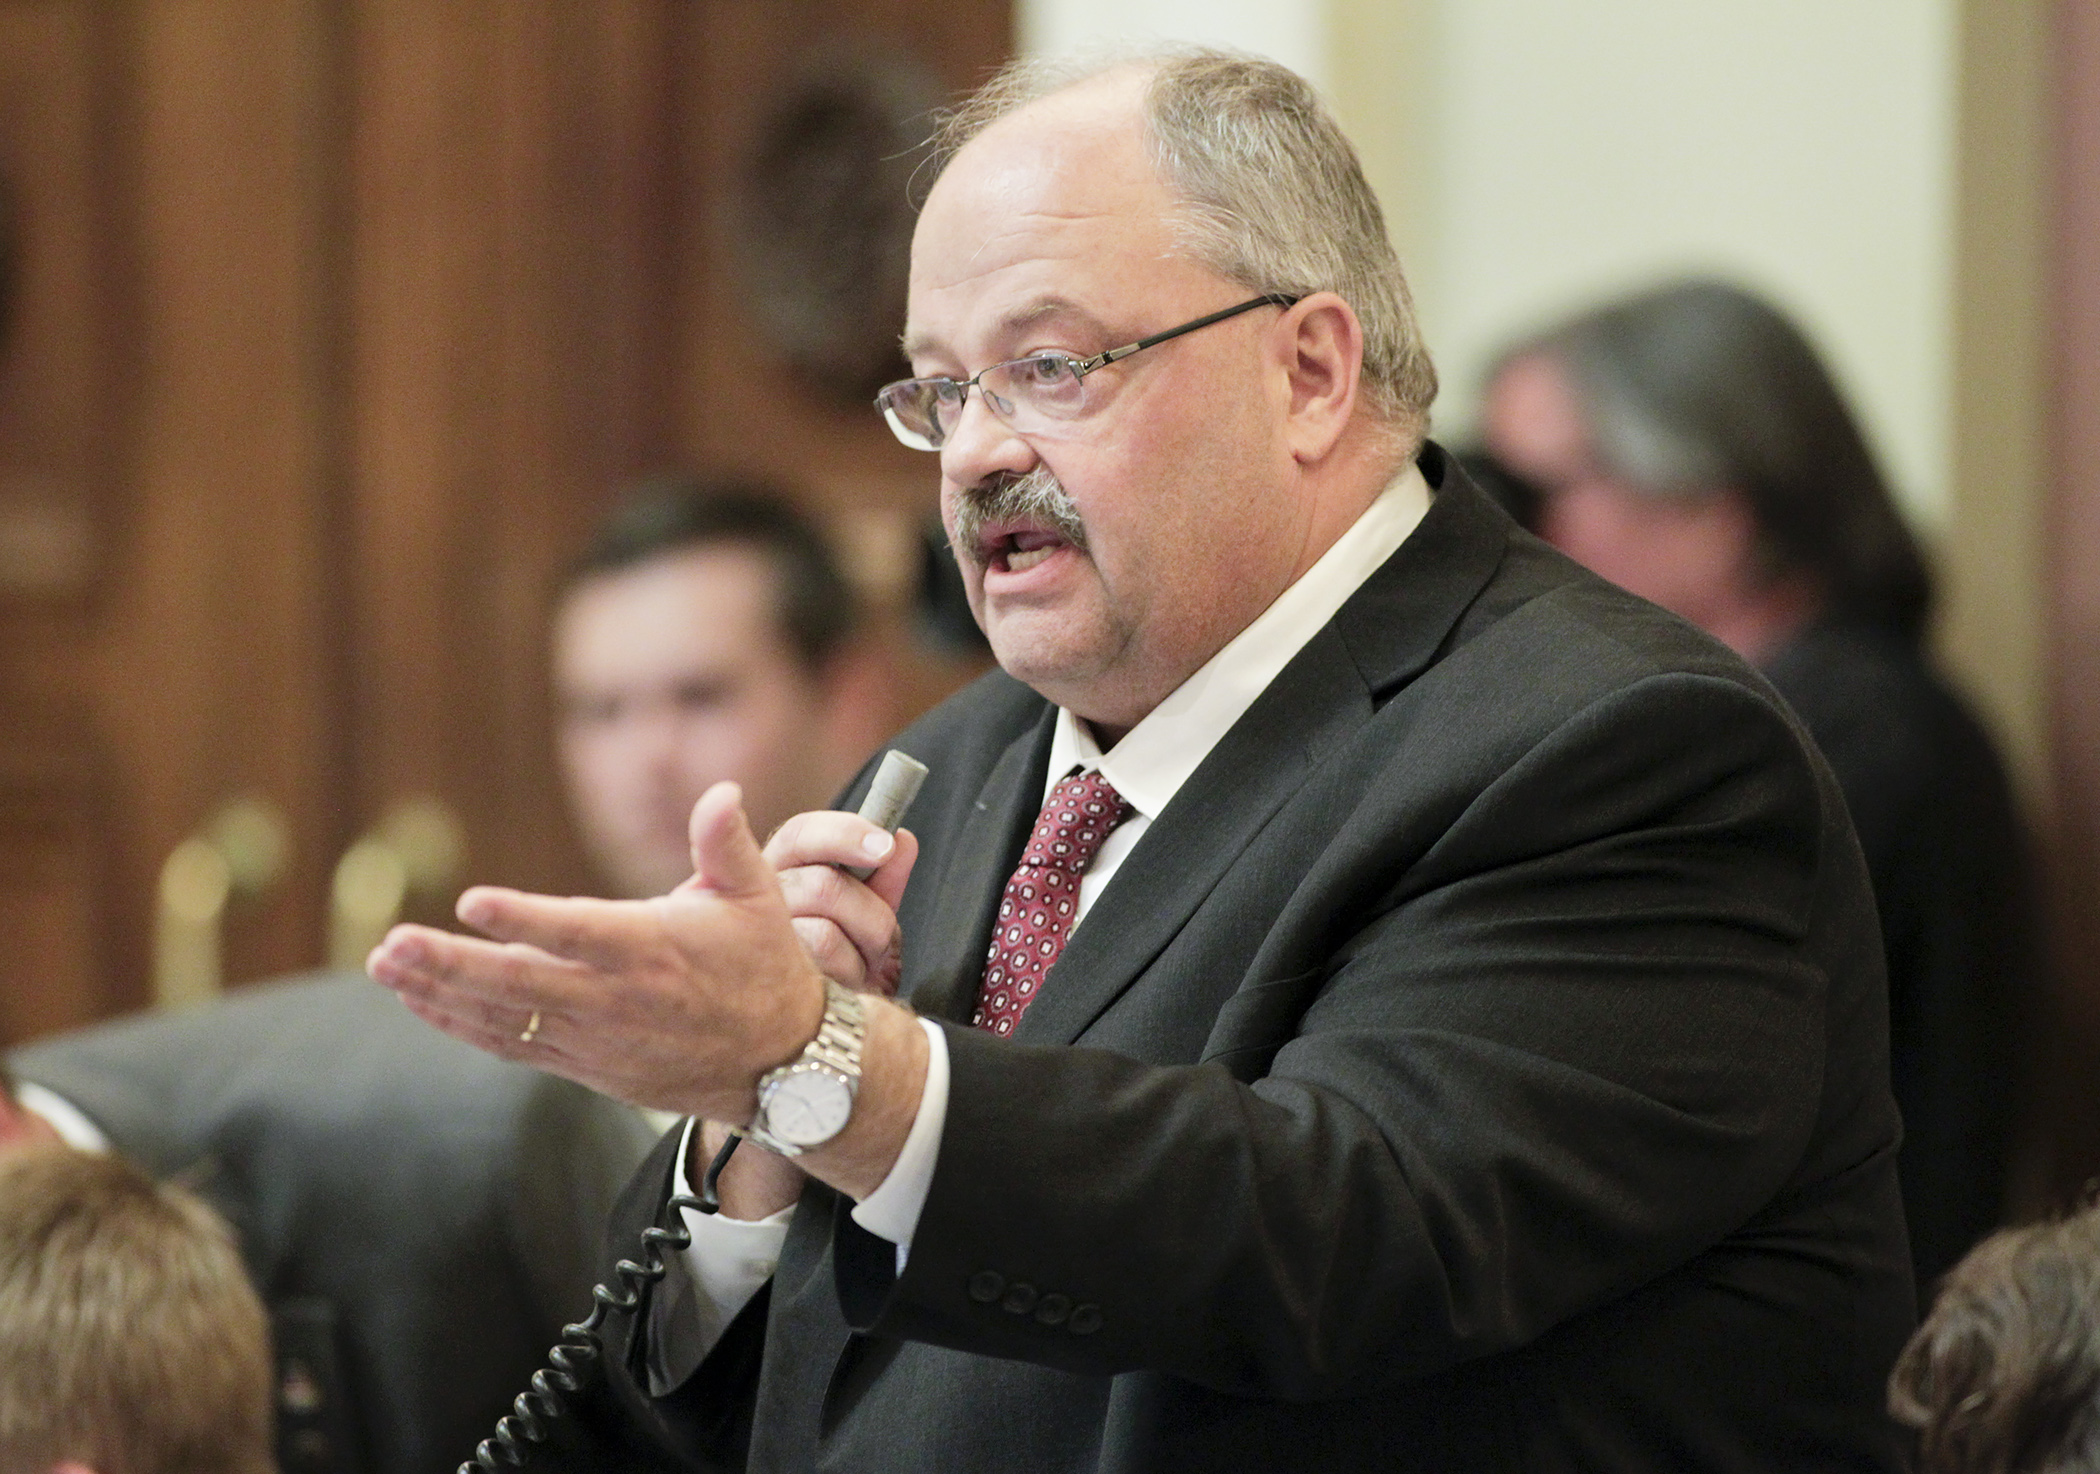 Rep. Greg Davids makes closing comments on the tax conference committee report May 22. The report was passed 123-10 by the House. Photo by Paul Battaglia